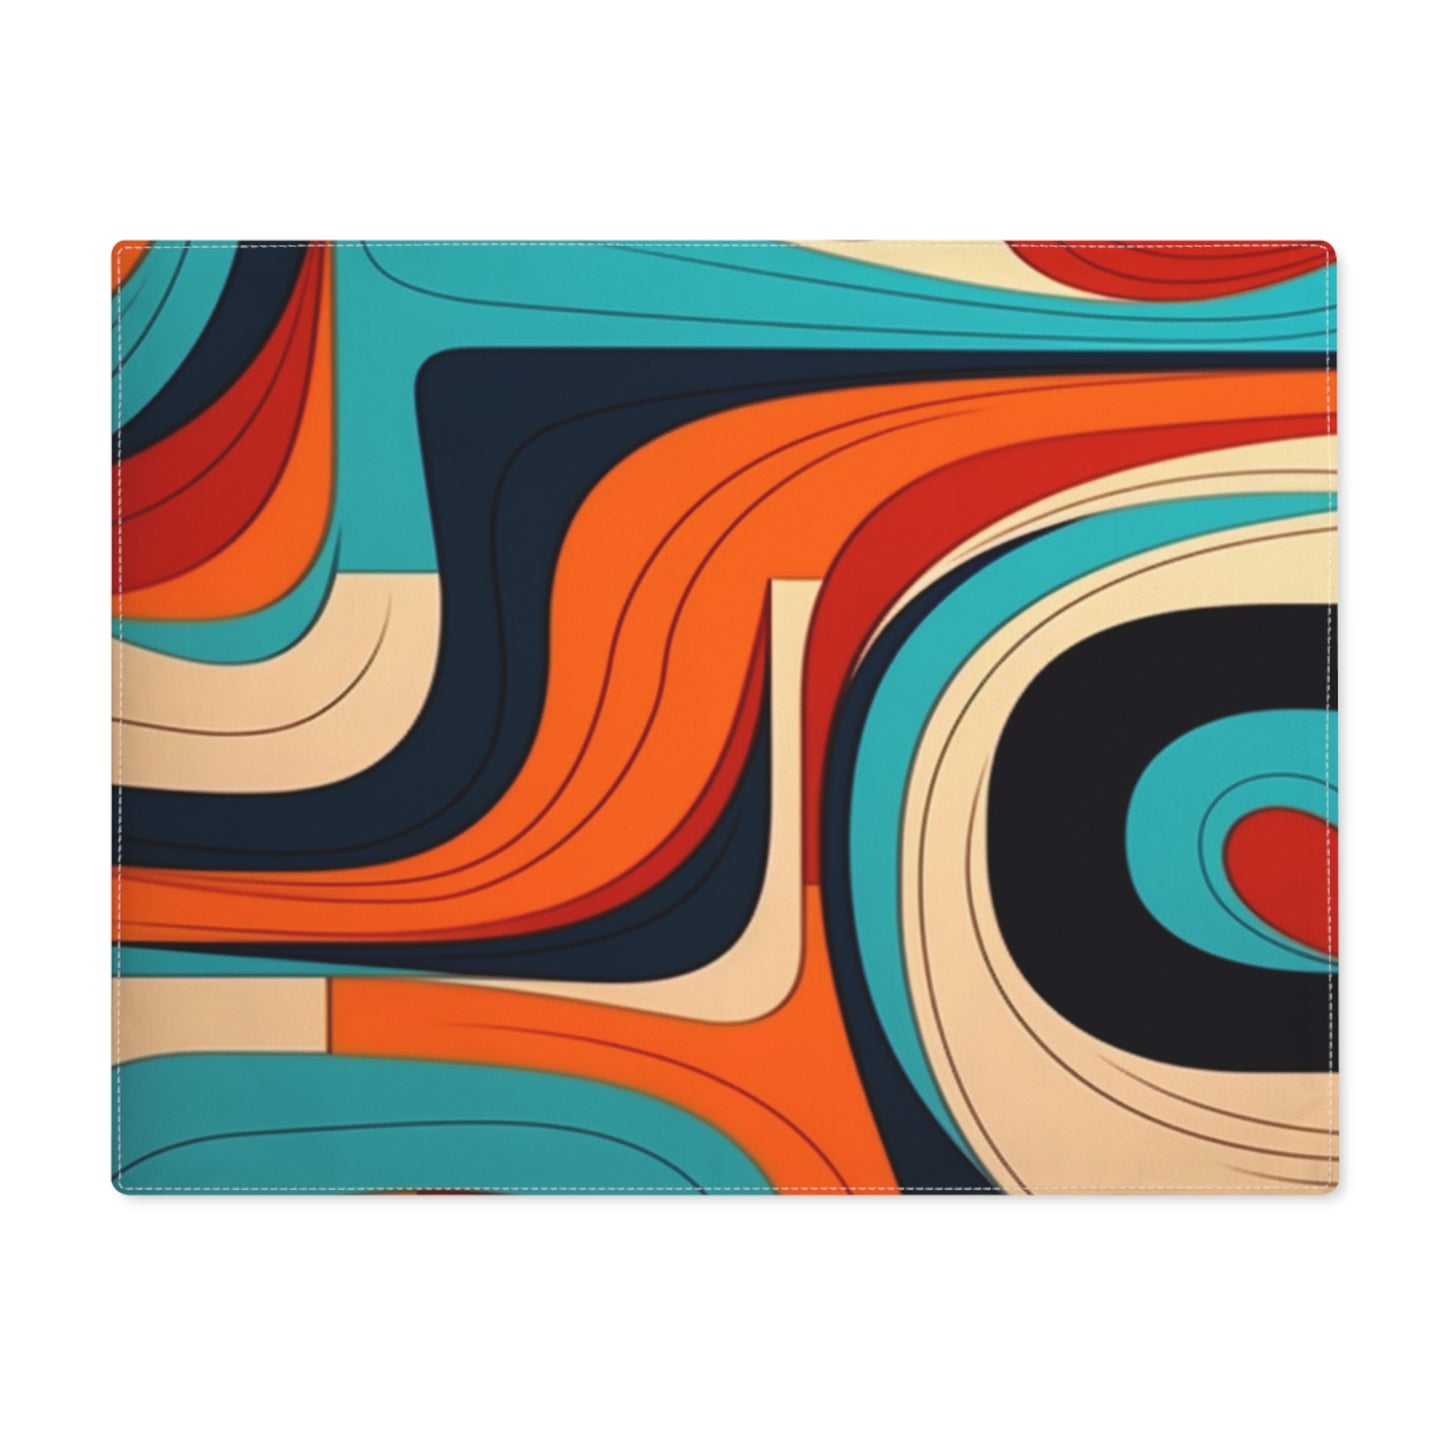 Midcentury Abstractions: Abstract-Inspired Placemat for Atomic Age Design